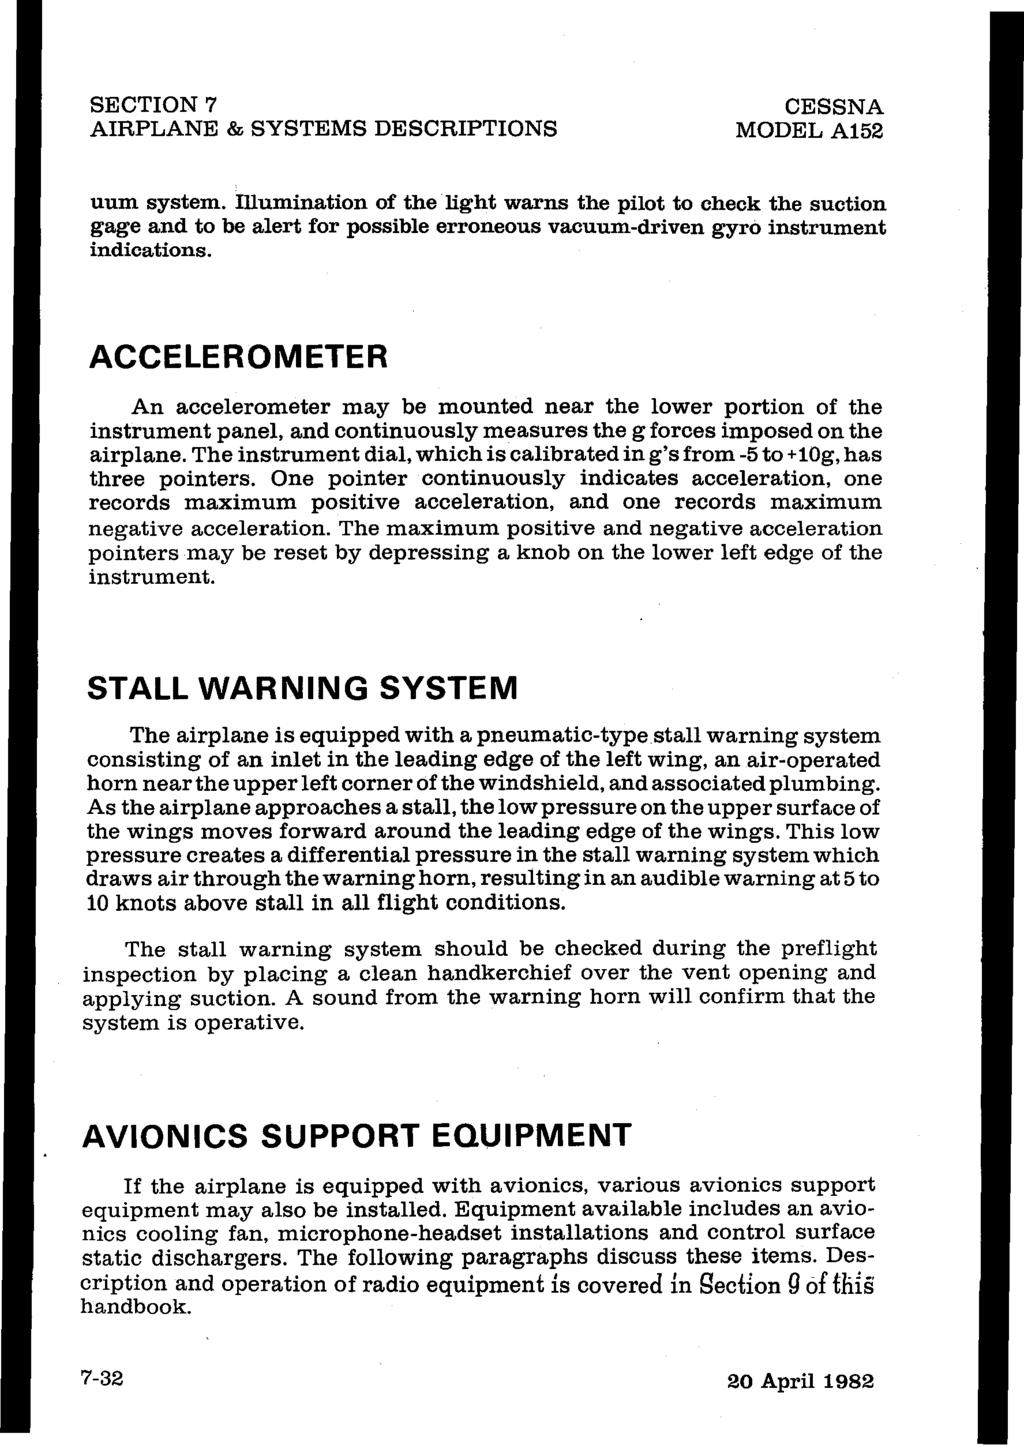 SECTION 7 AIRPLANE & SYSTEMS DESCRIPTIONS CESSNA MODEL A152 uum system.